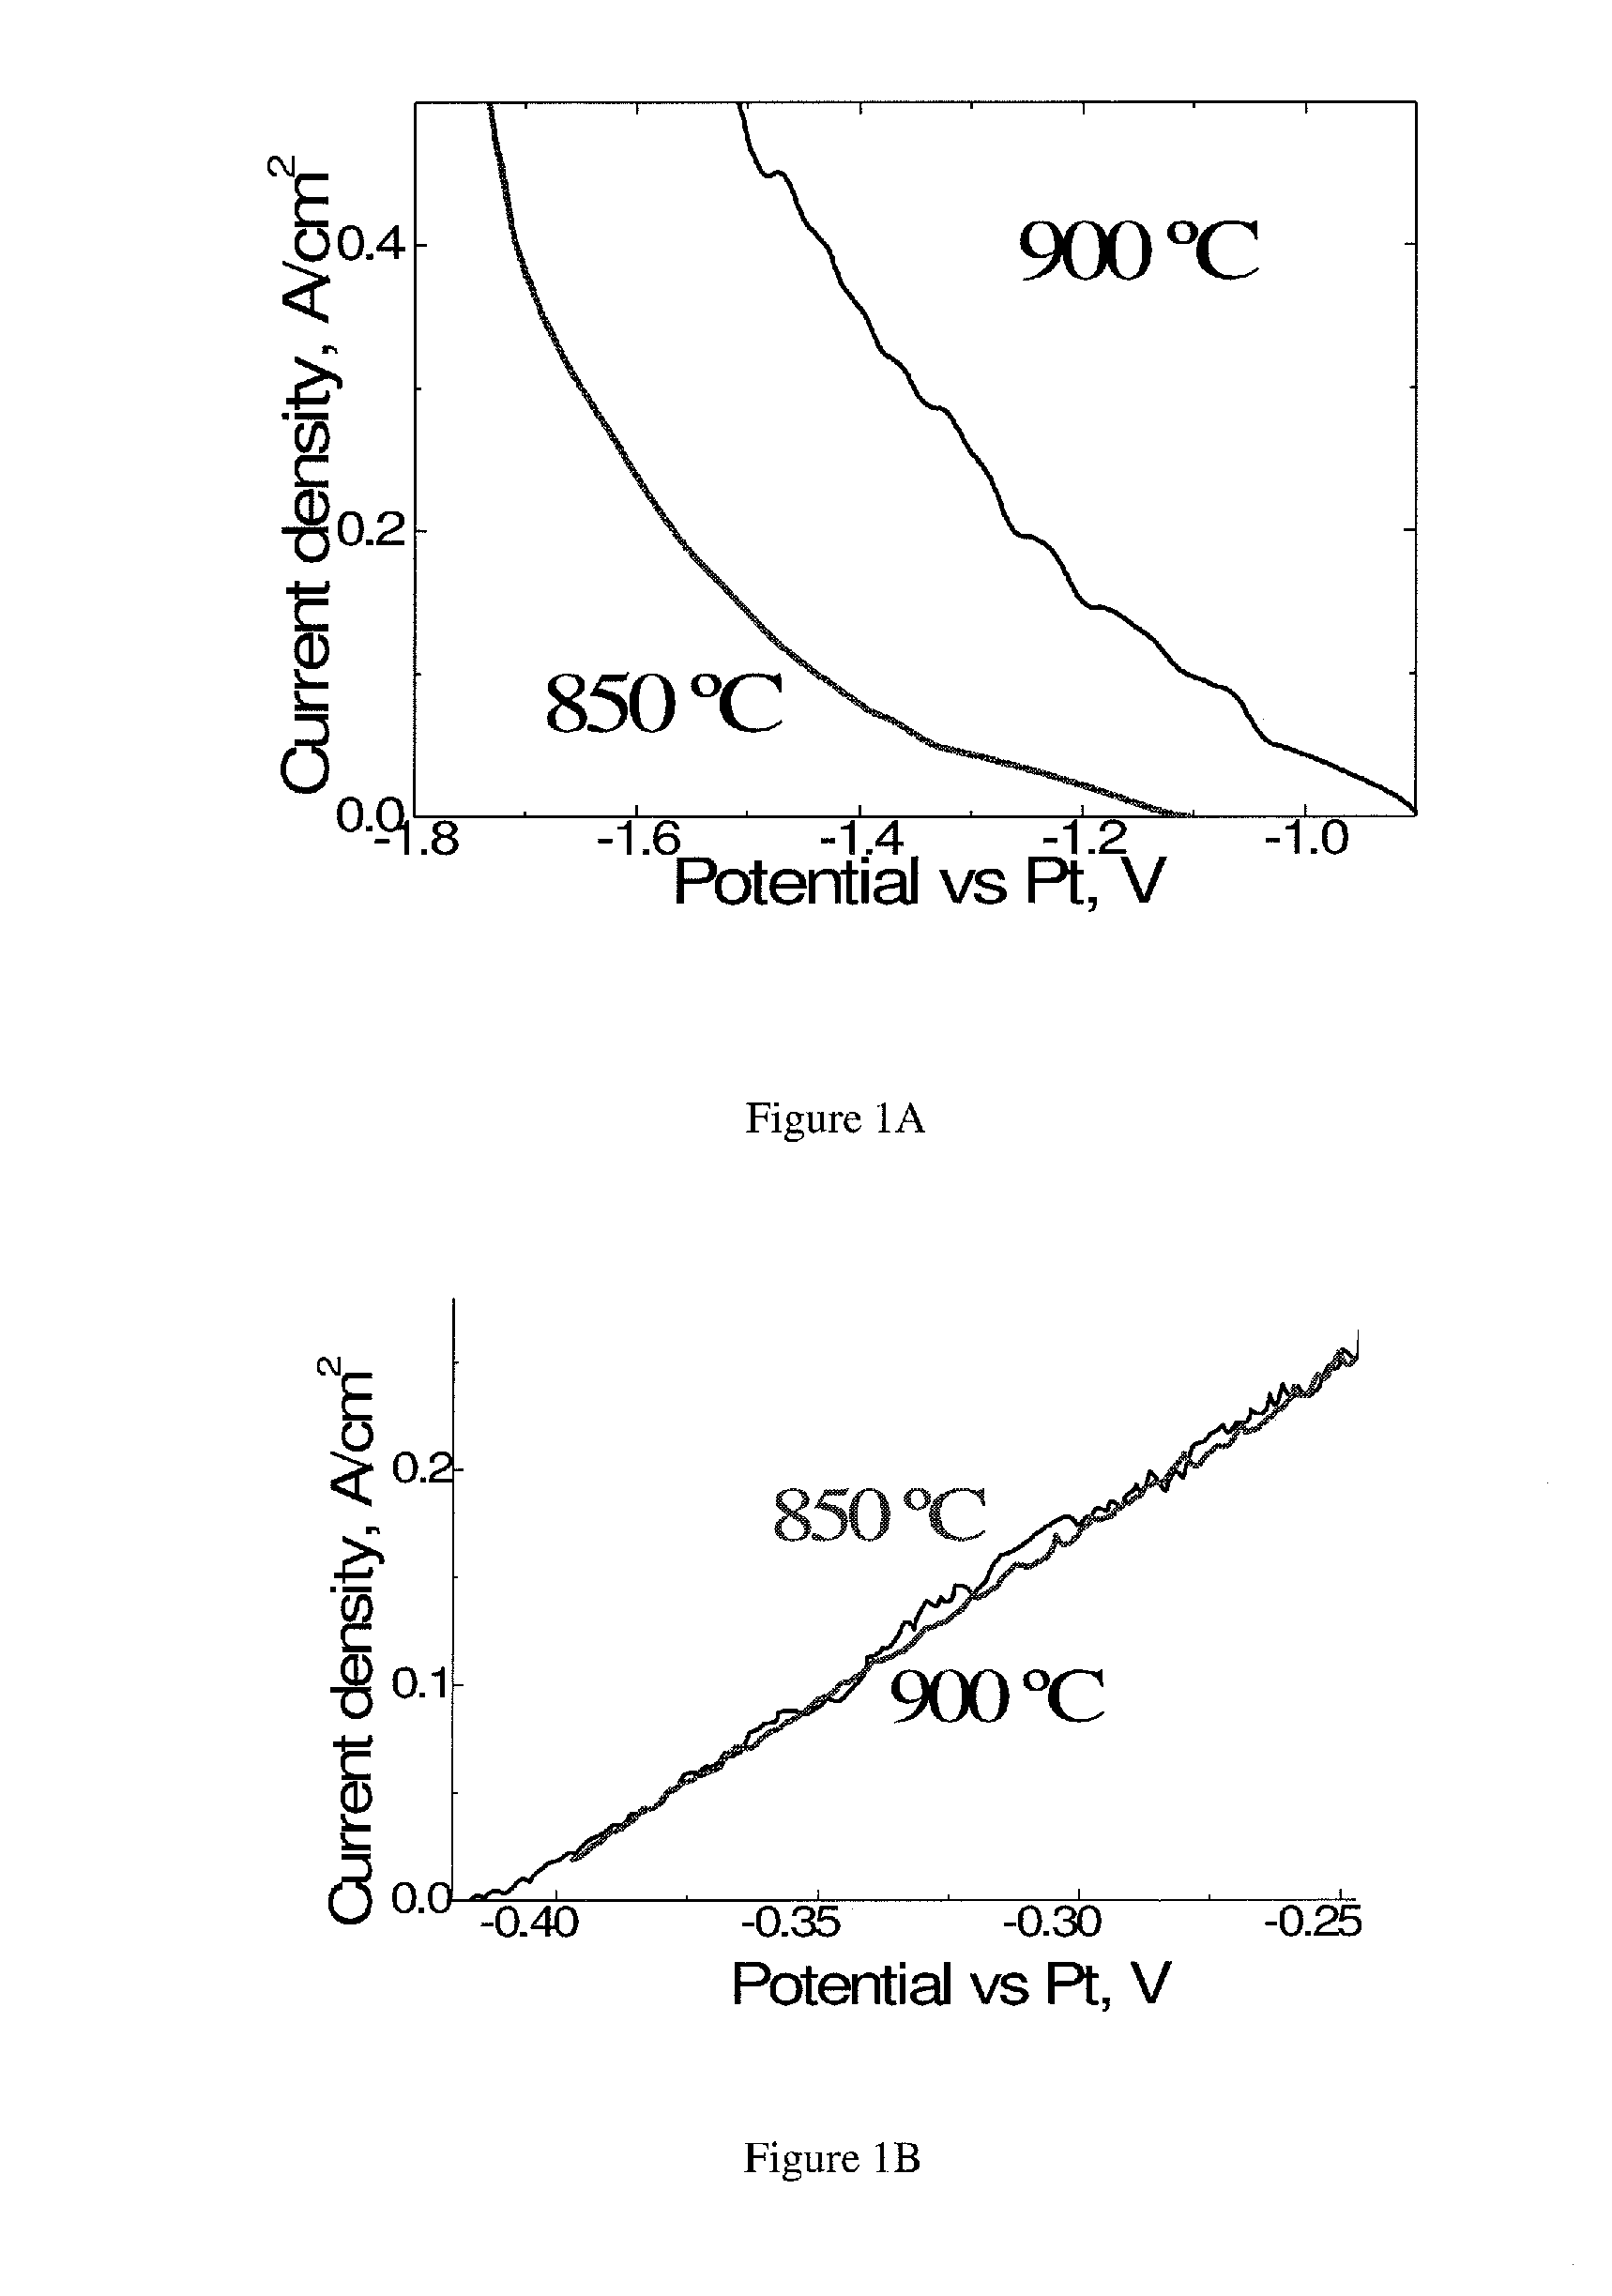 Methods and apparatus of electrochemical production of carbon monoxide, and uses thereof